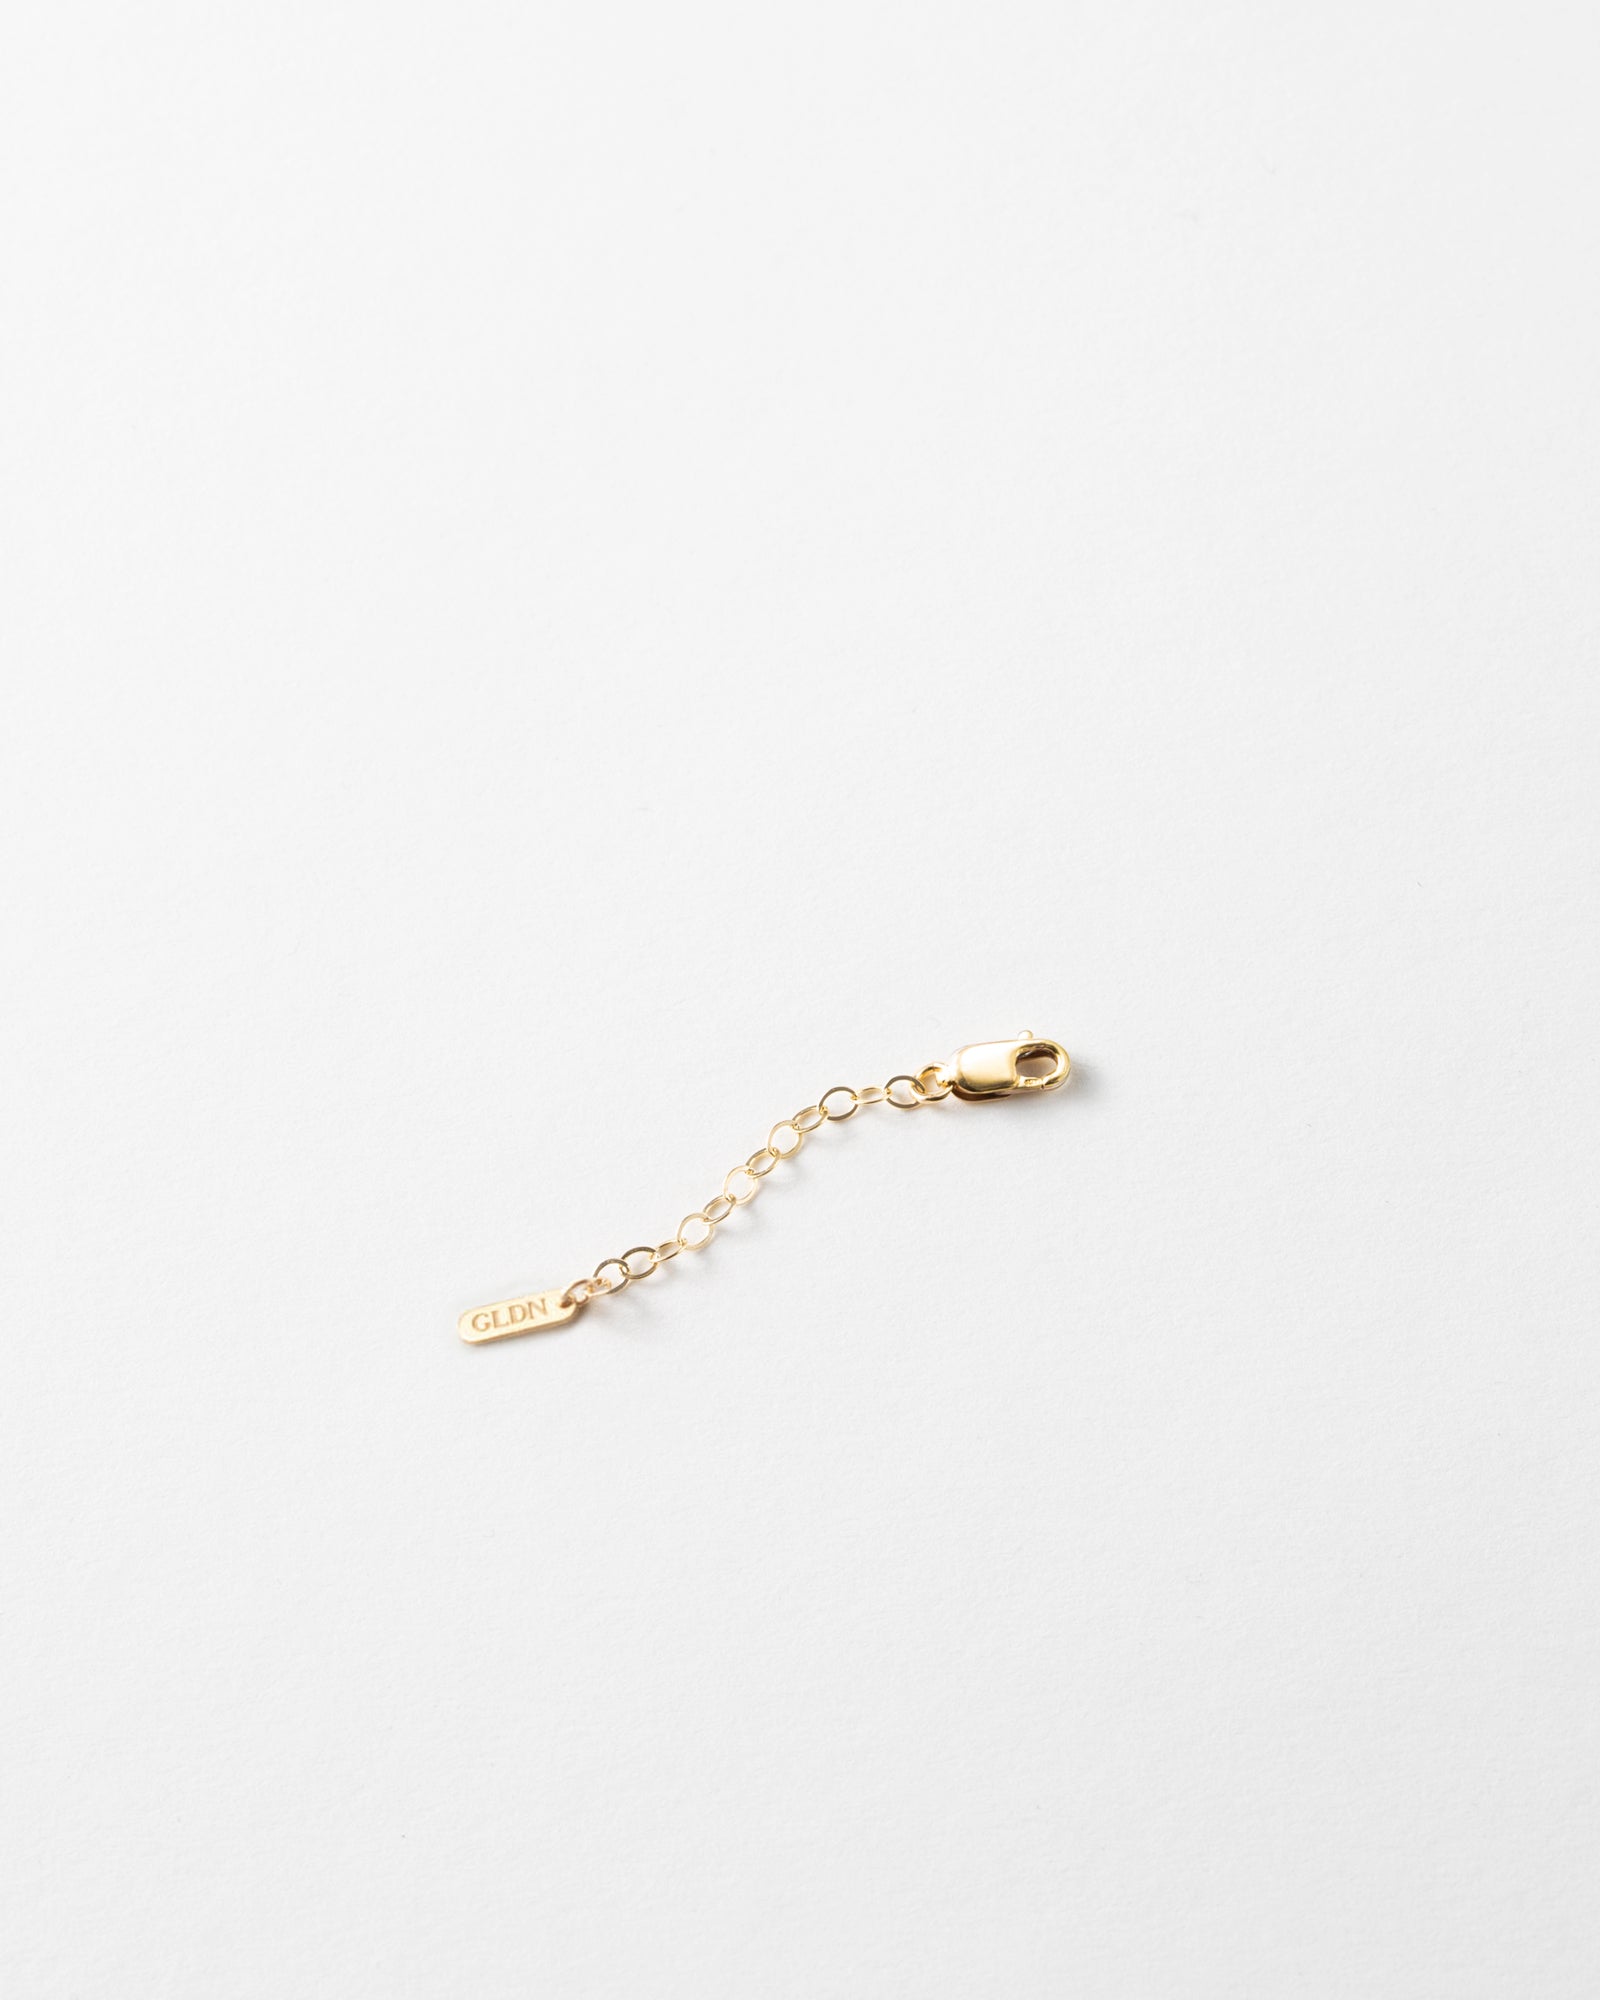 Rose Gold Chain Extender, 14k Rose Gold Filled, Removable Chain Extension, Necklace  Extension, Bracelet Extender, Add Length to Necklace 